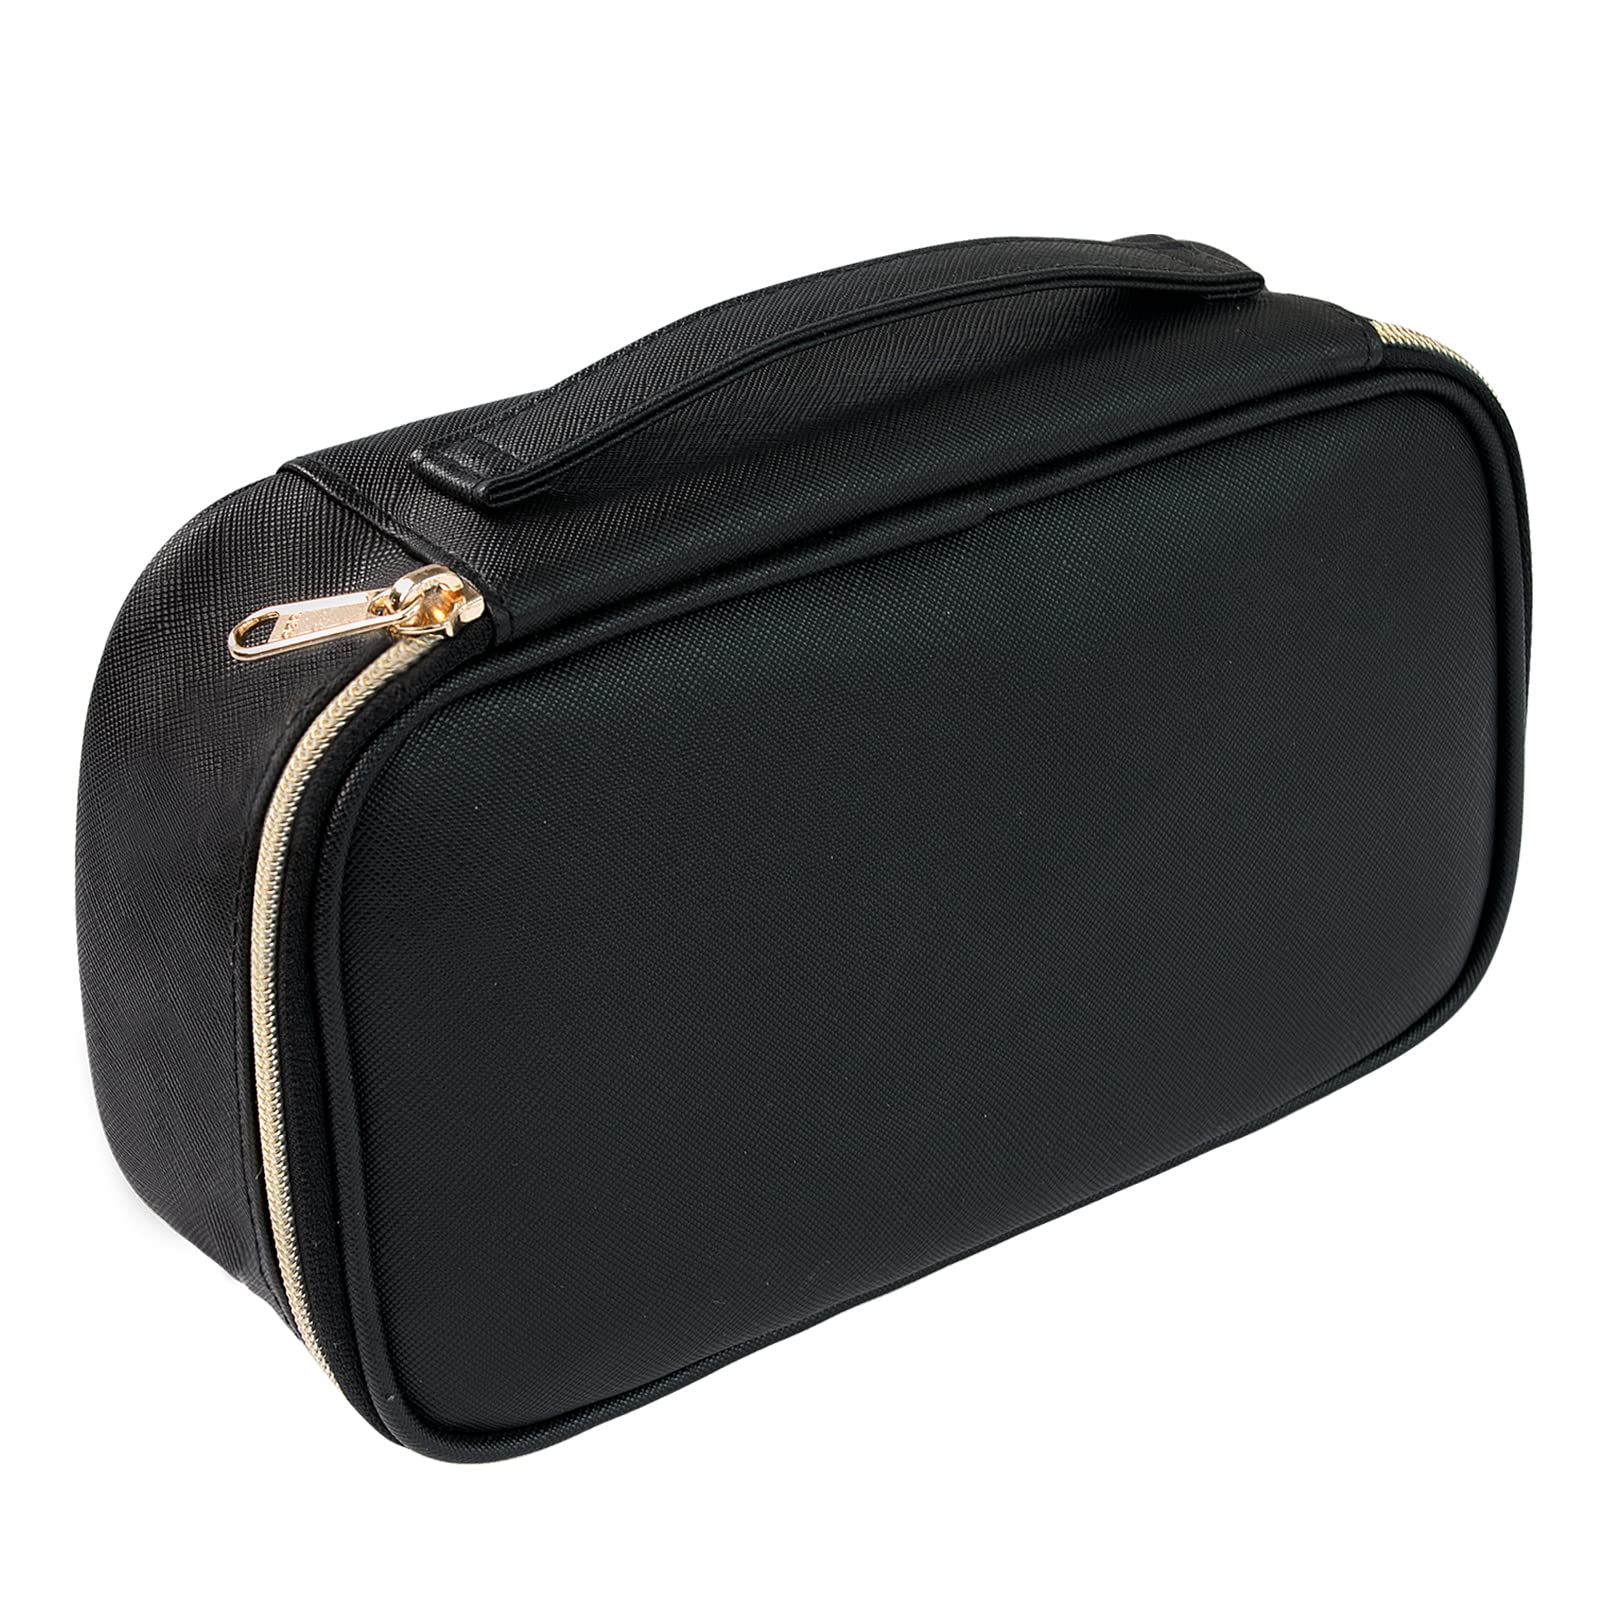 Small Cosmetic Bag,Portable Cute Travel Makeup Bag for Women and